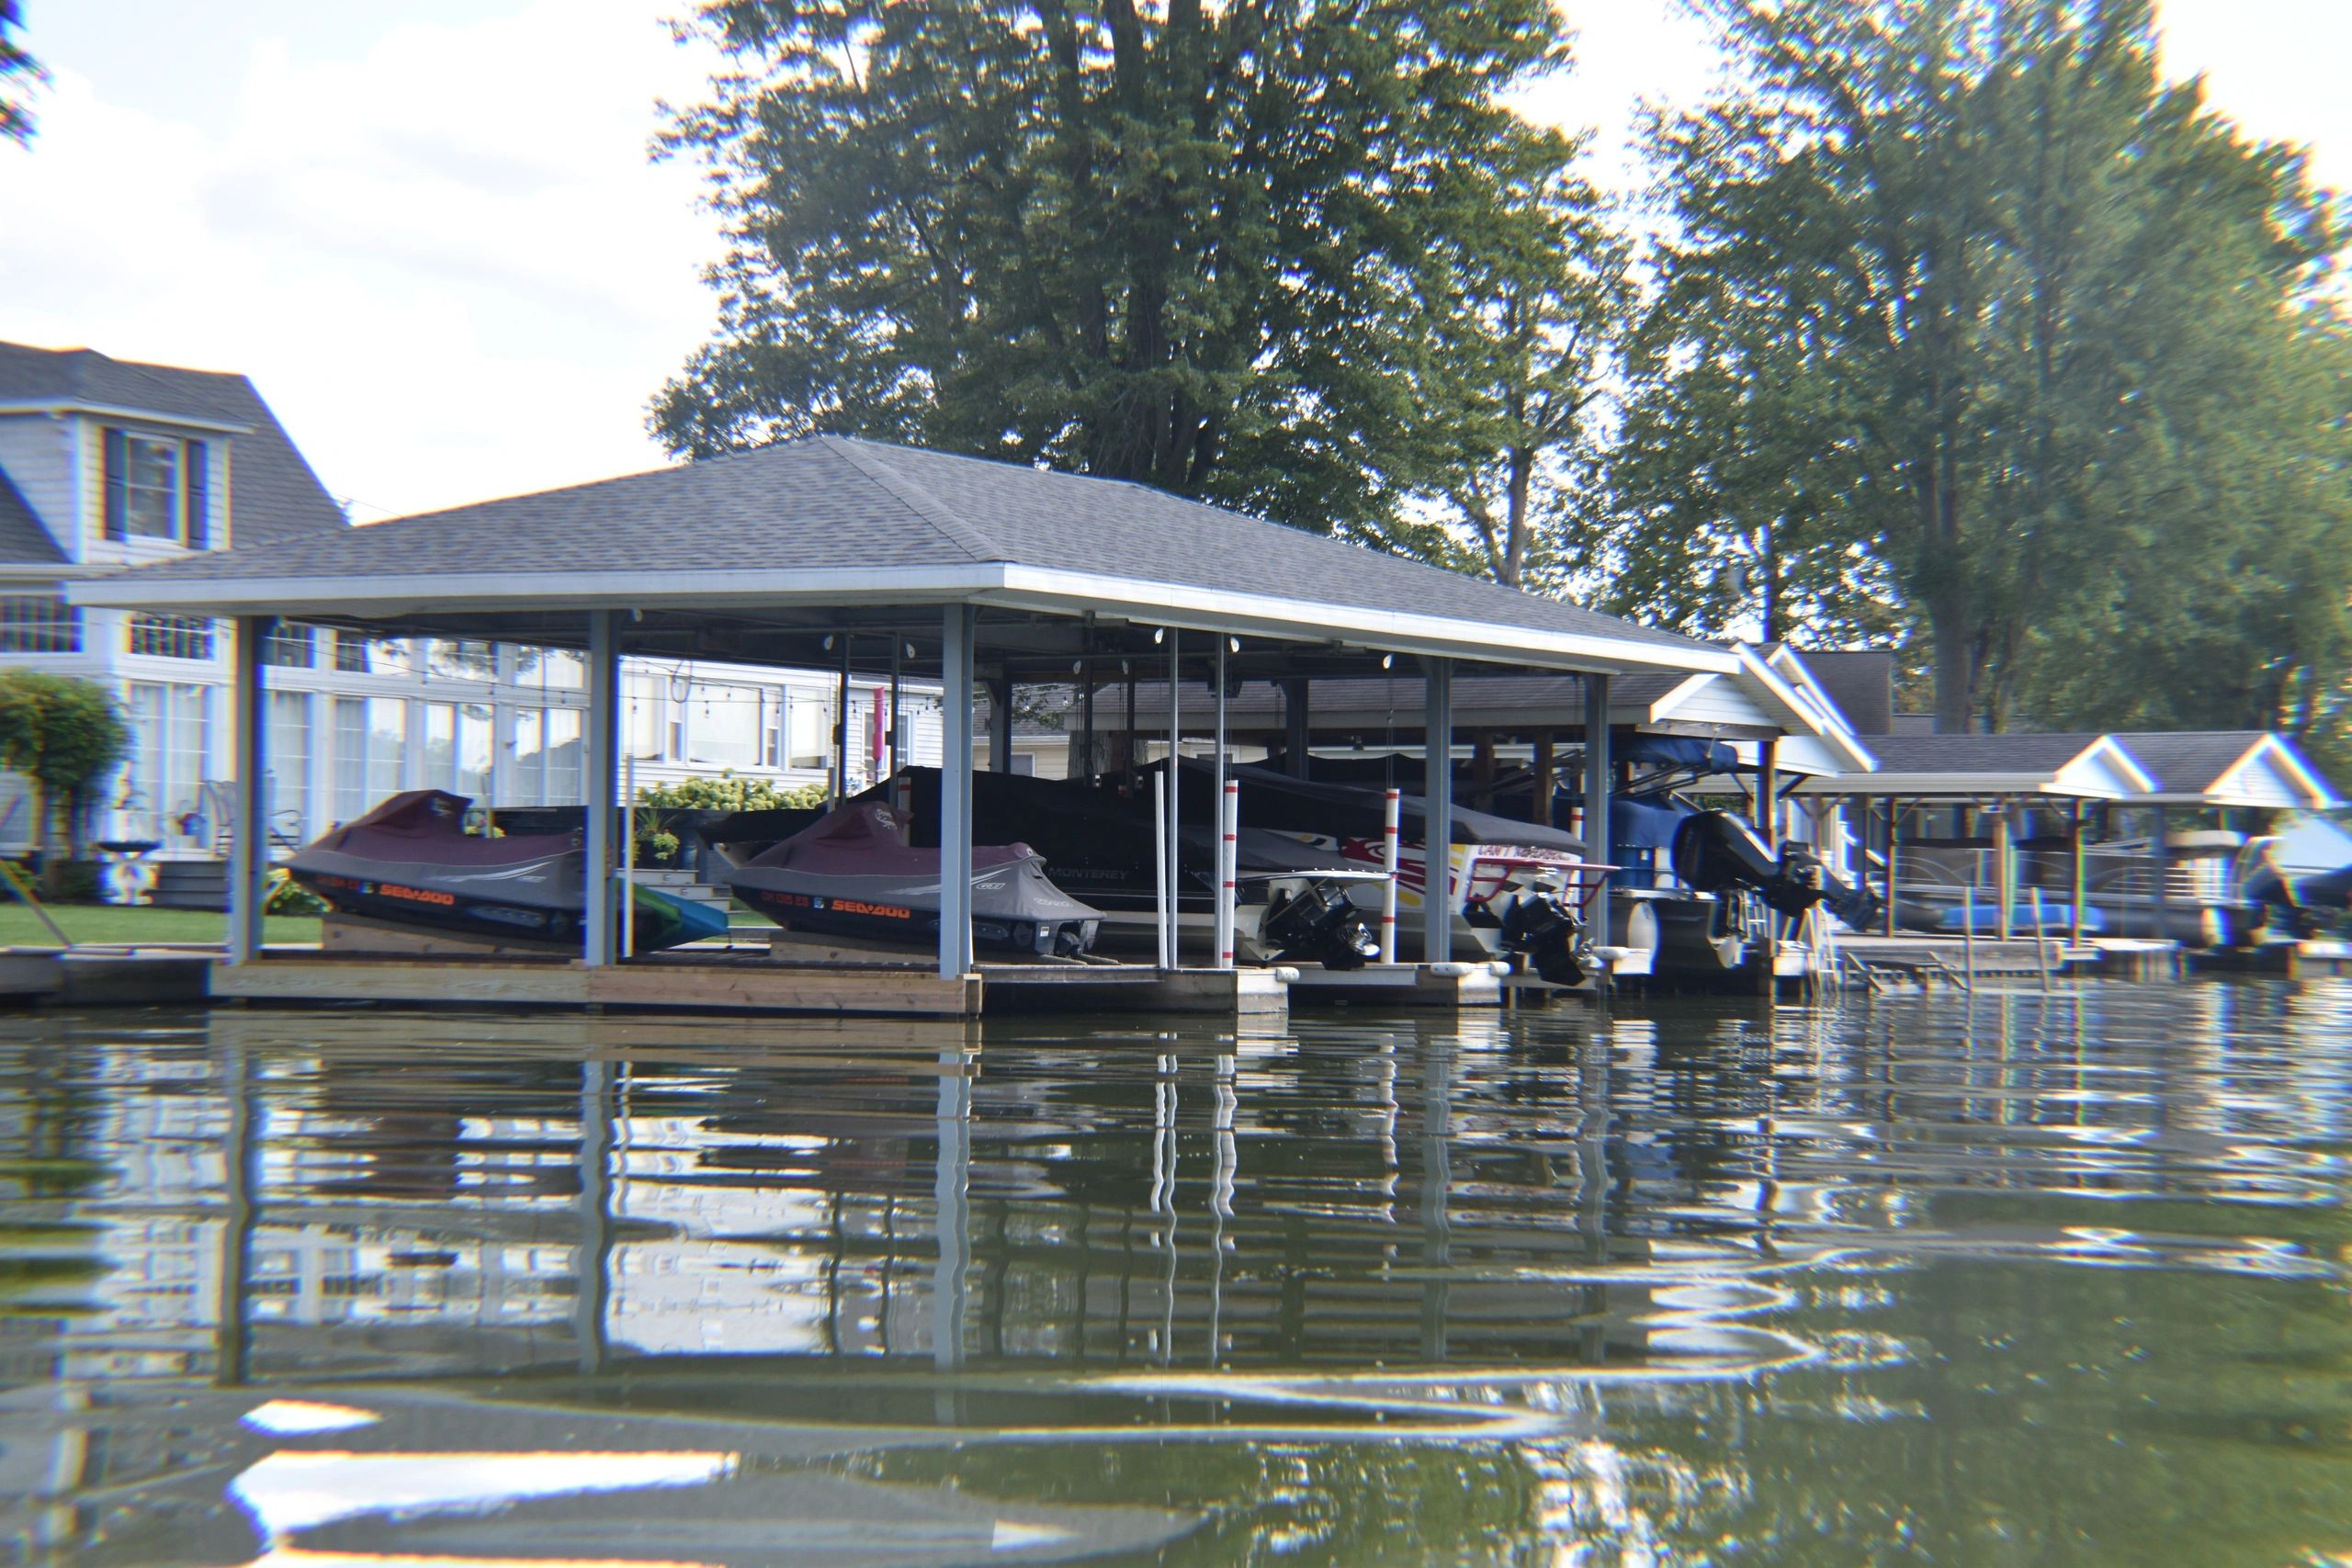 Pontoon and jet skis sitting under shelter as an example of boat docks and seawall repair.